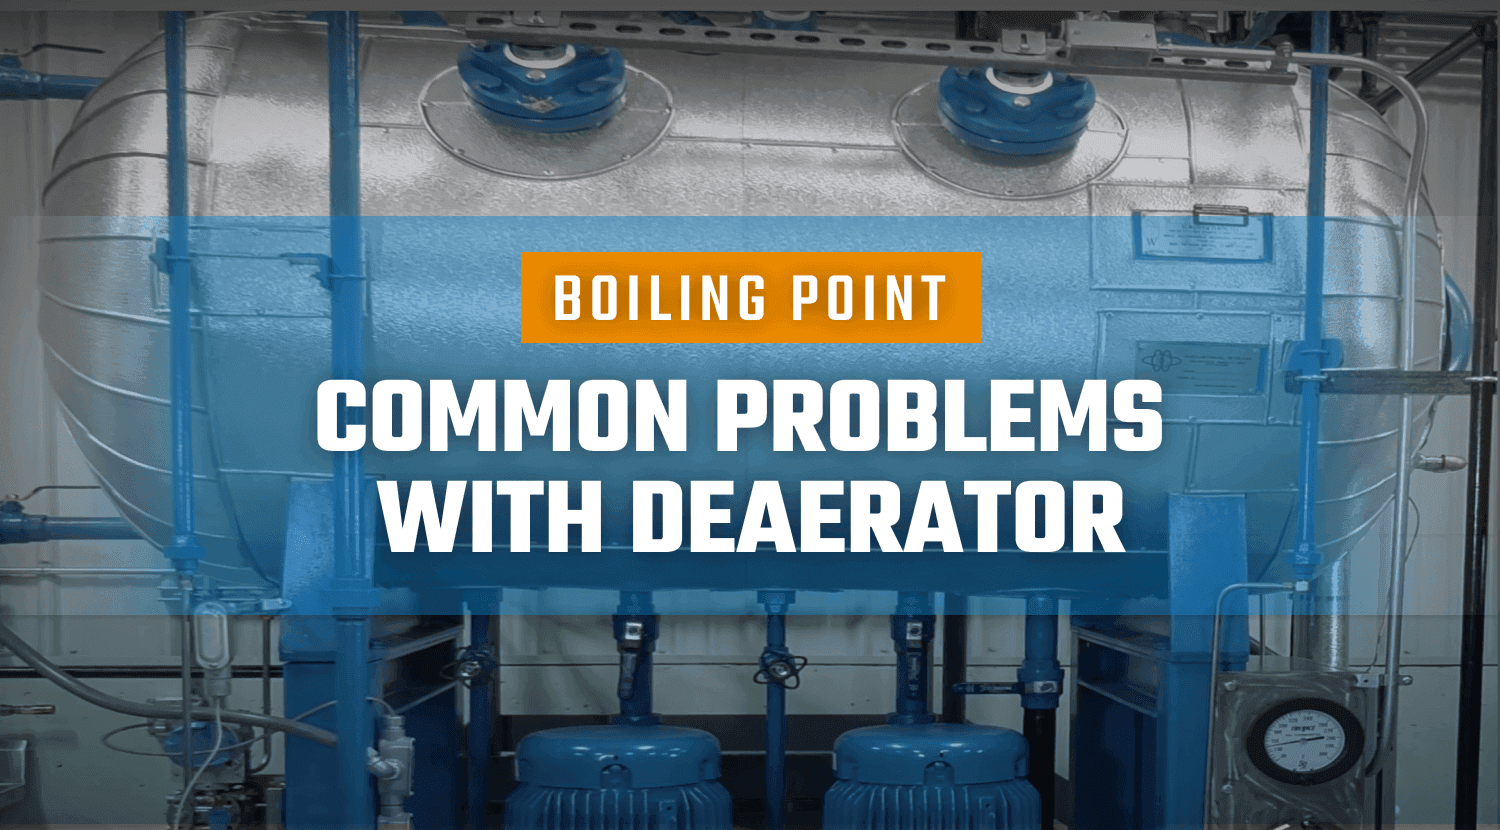 Common Problems with a Deaerator